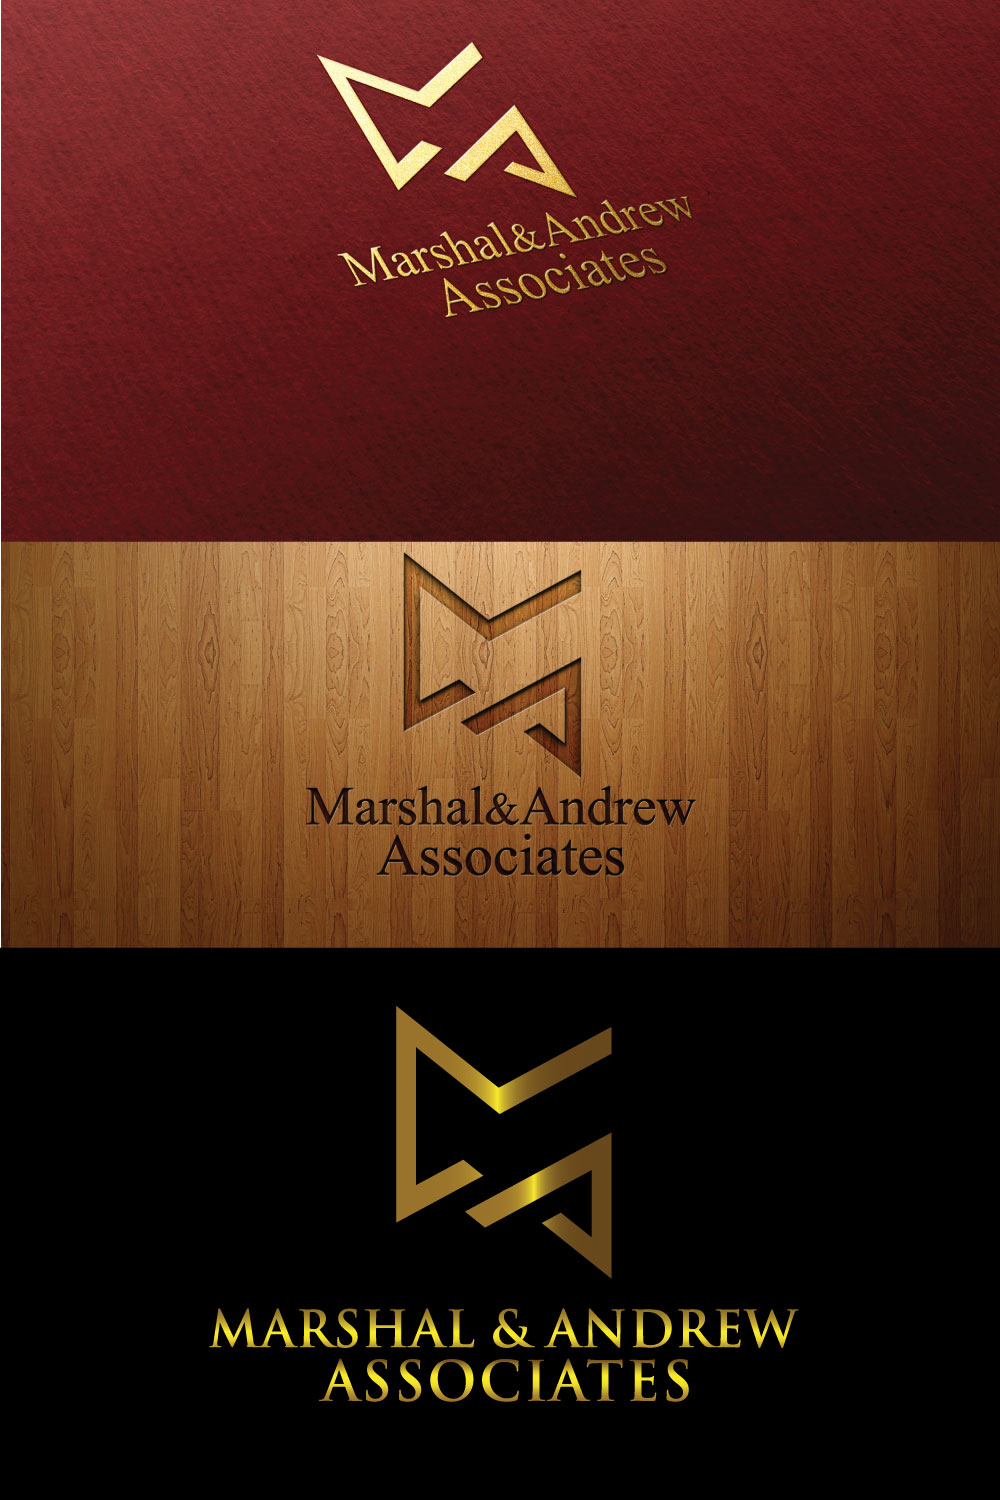 MA real estate logo (marshal and andrew associate) pinterest preview image.